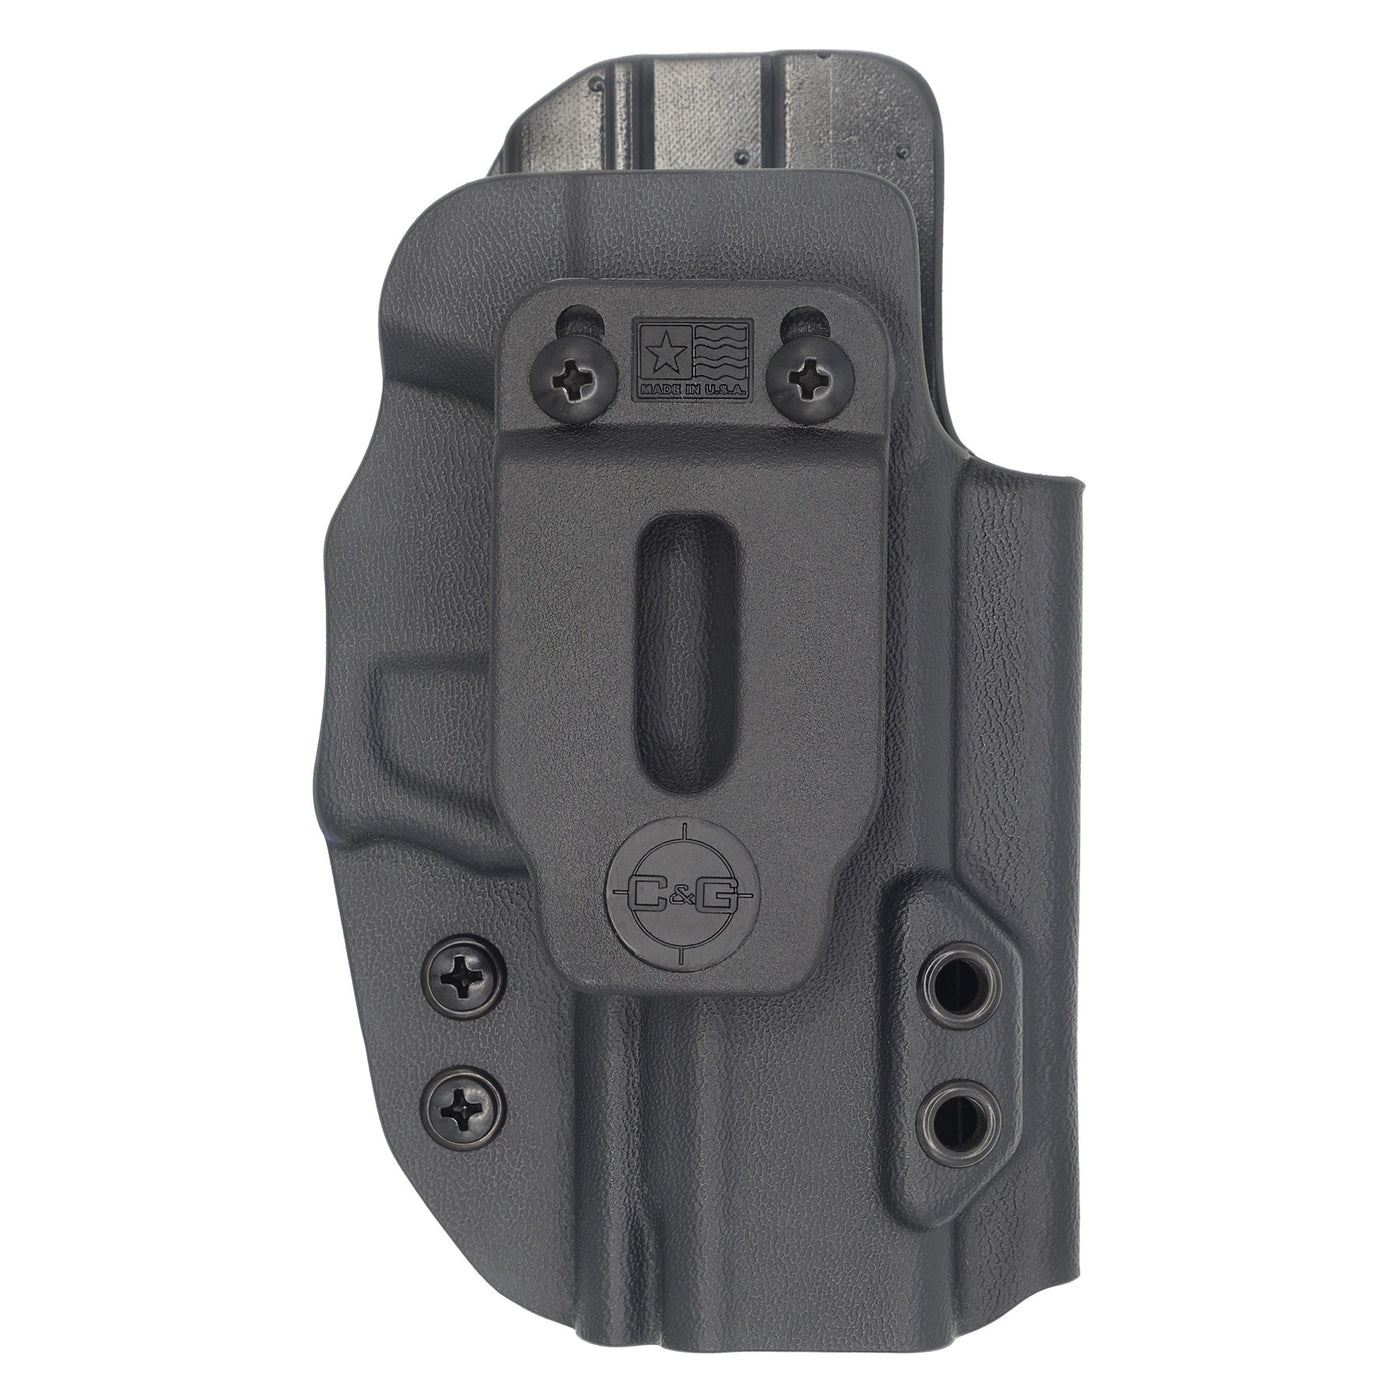 This is the custom C&G Holsters inside the waistband holster for the Poly80 PF940c.